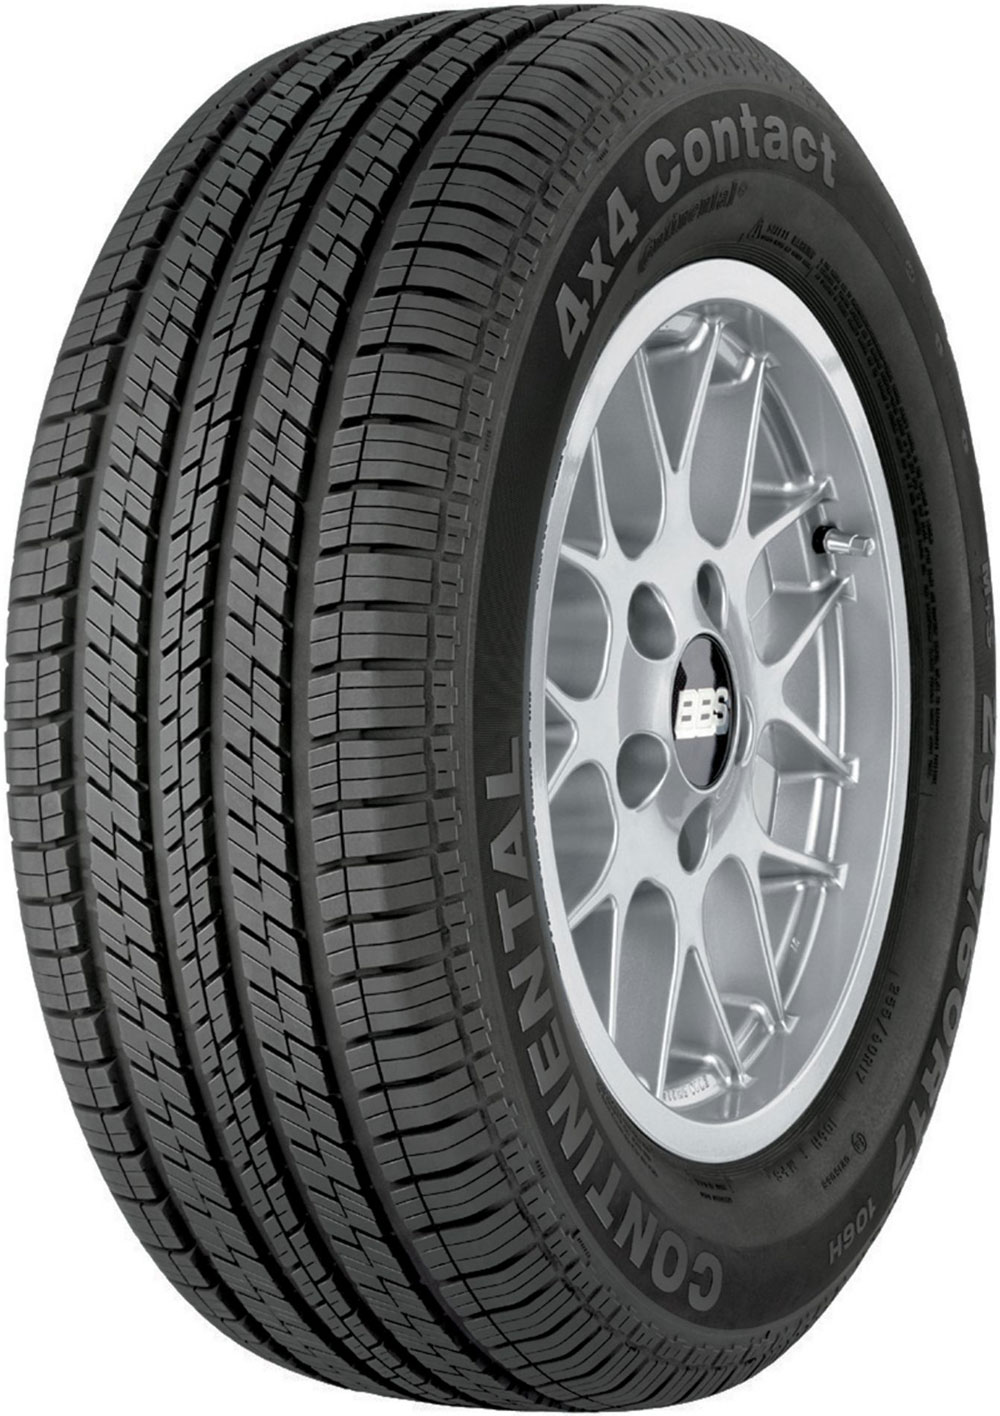 CONTINENTAL 4X4 CONTACT # 225/65 R17 102T